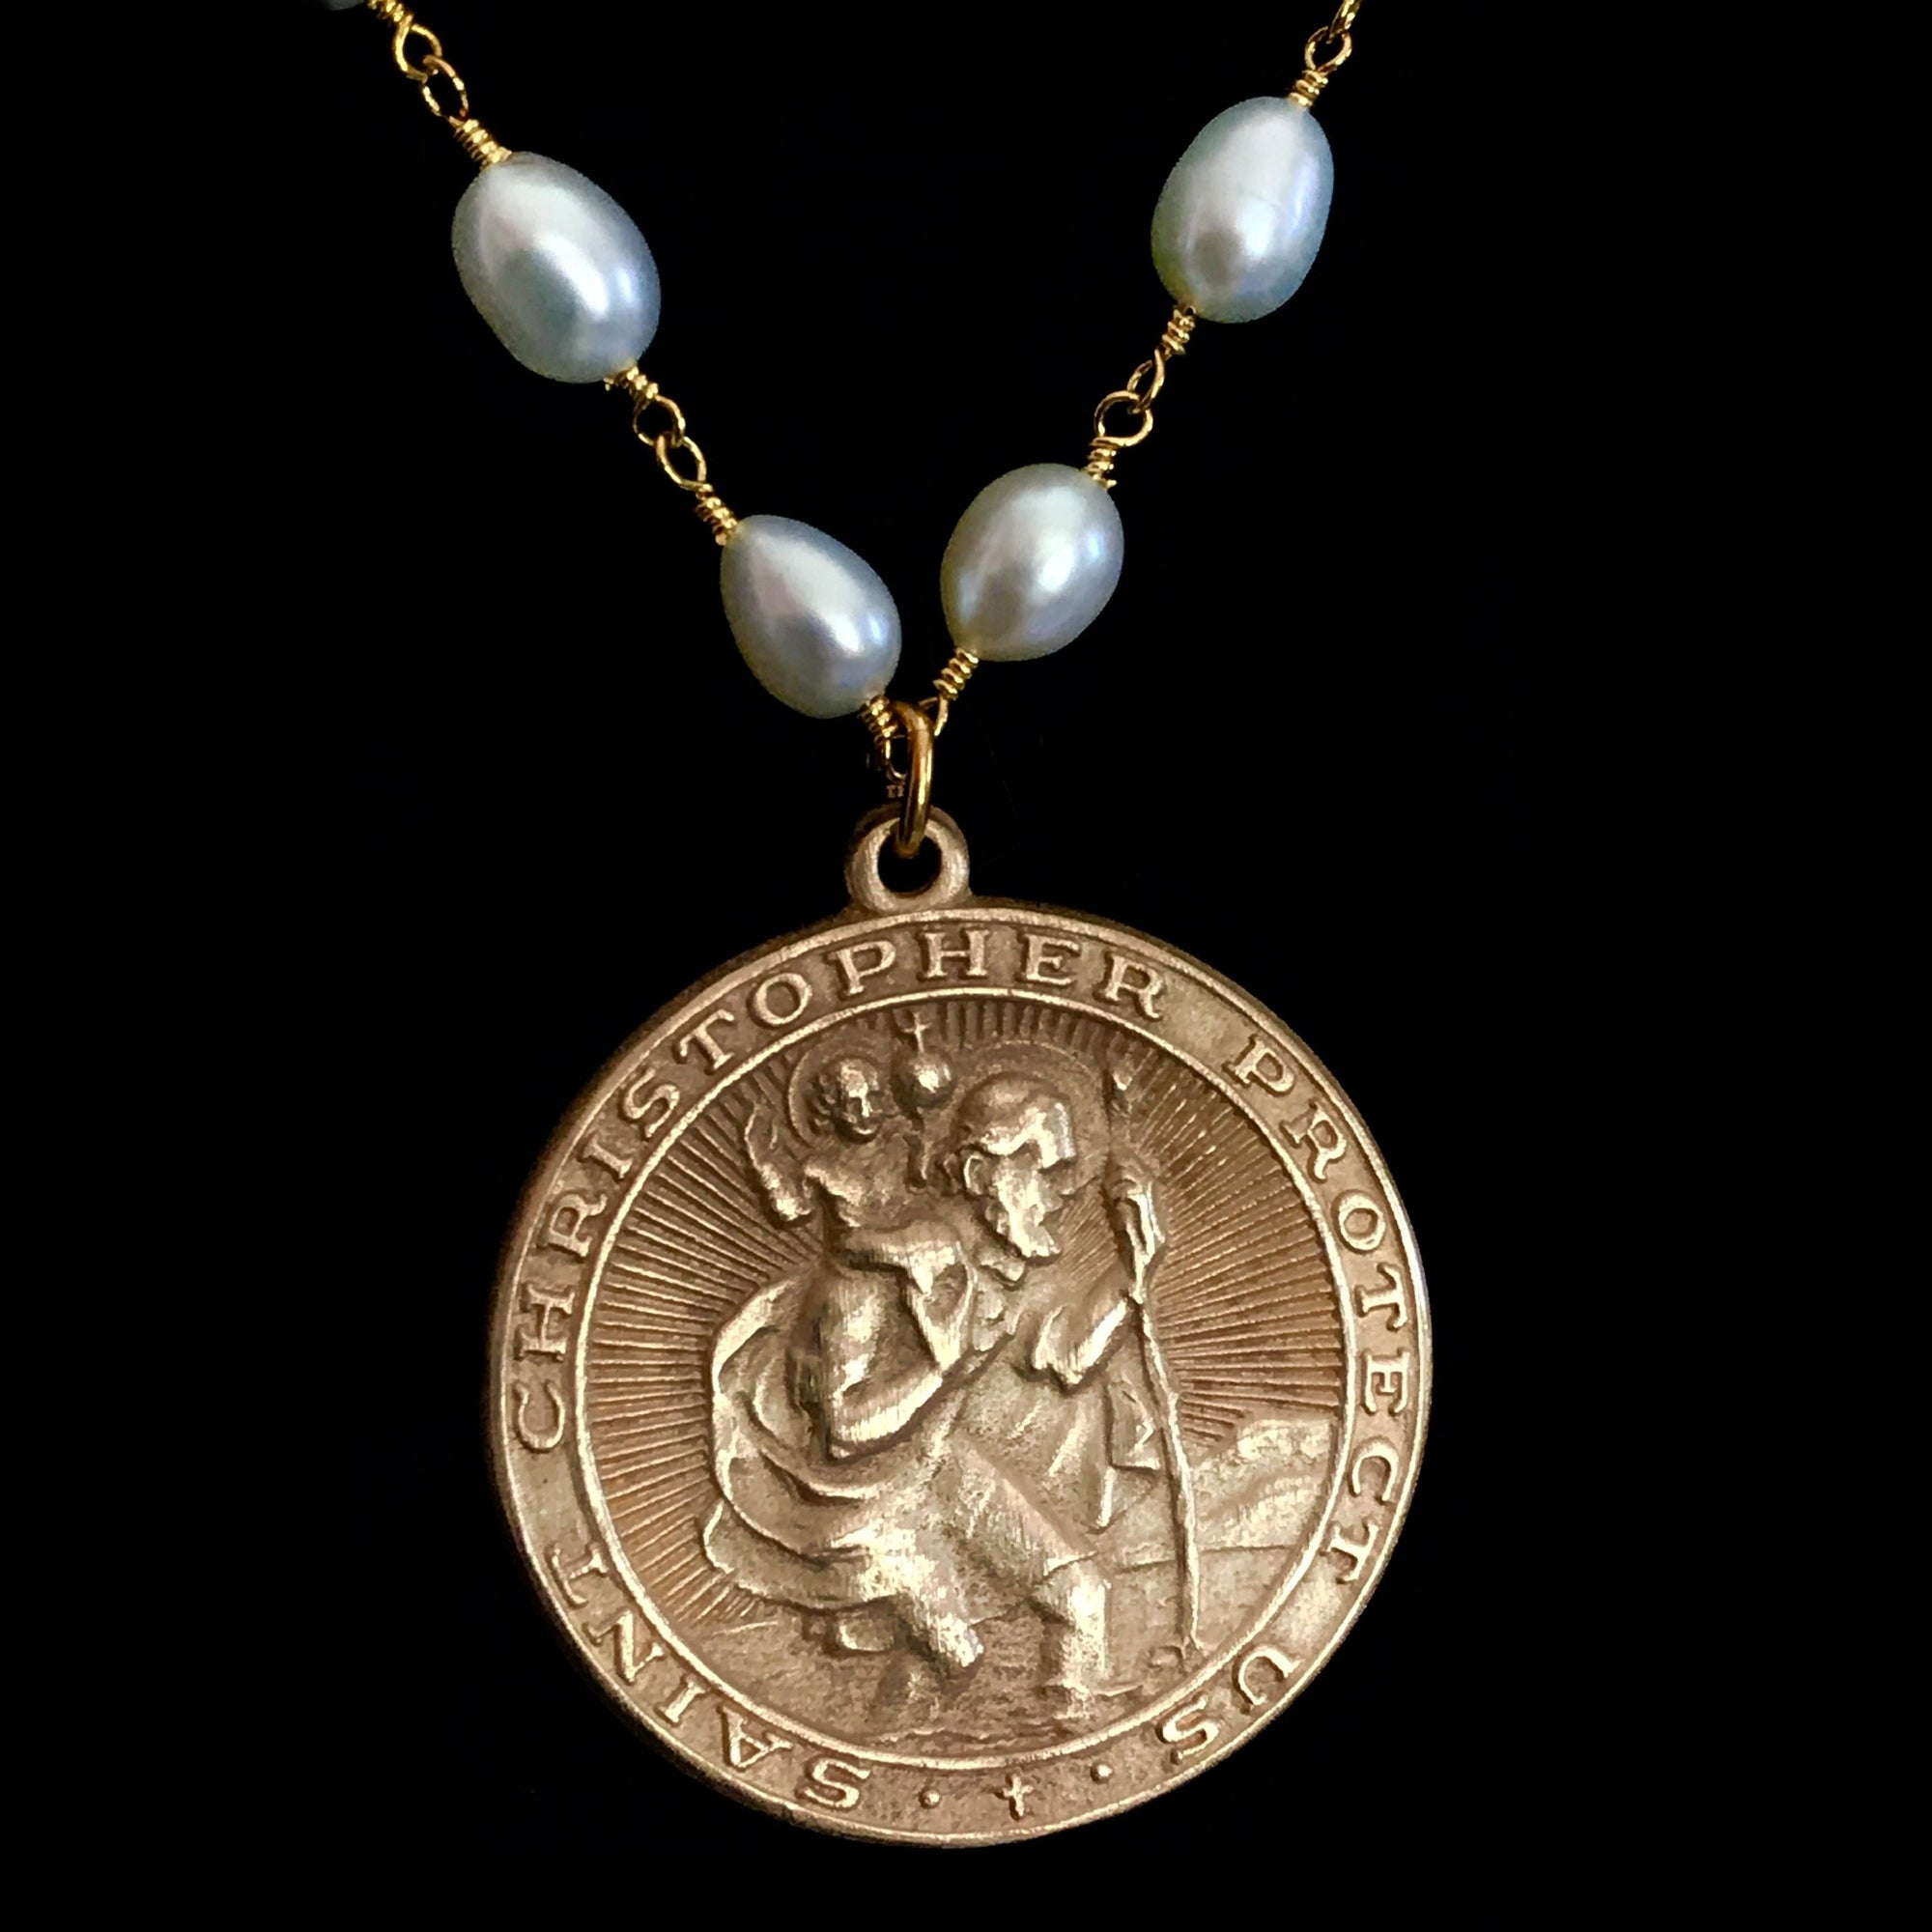 Saint Christopher Trinity Necklace in Freshwater Pearls & Gold by Whispering Goddess